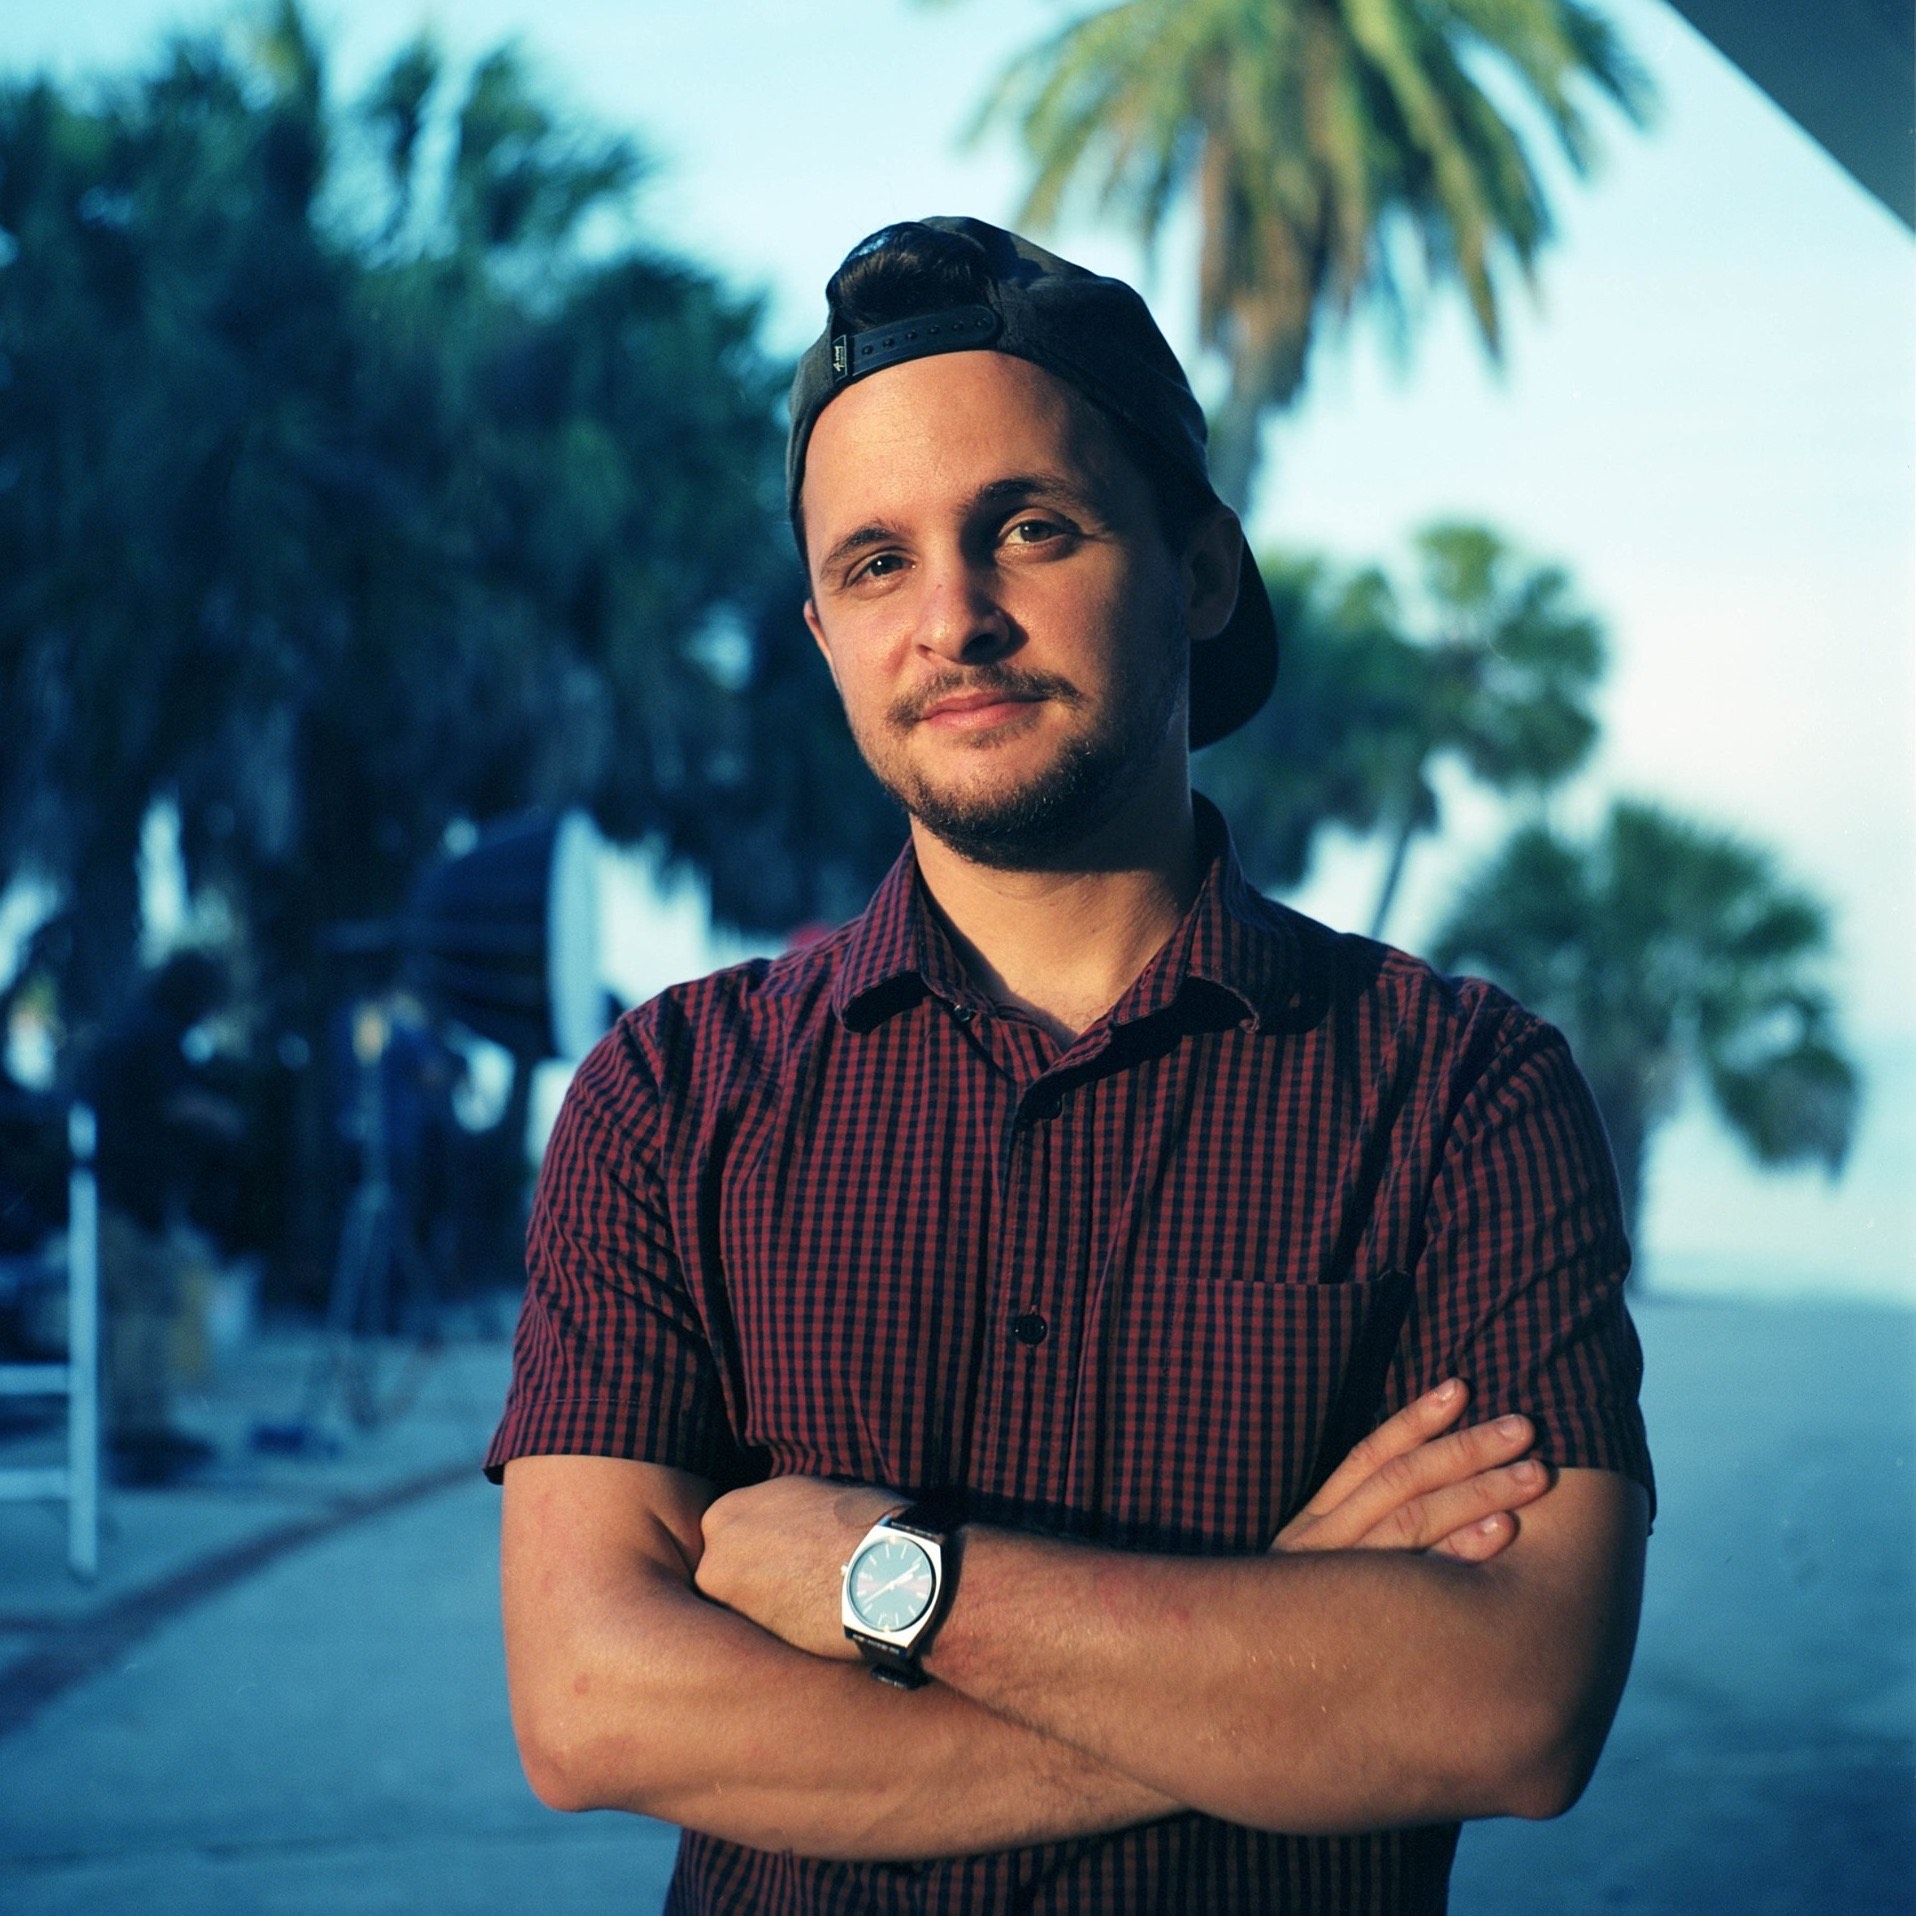 Capturing St. Pete youth: Tony Ahedo debuts feature film “ICON”